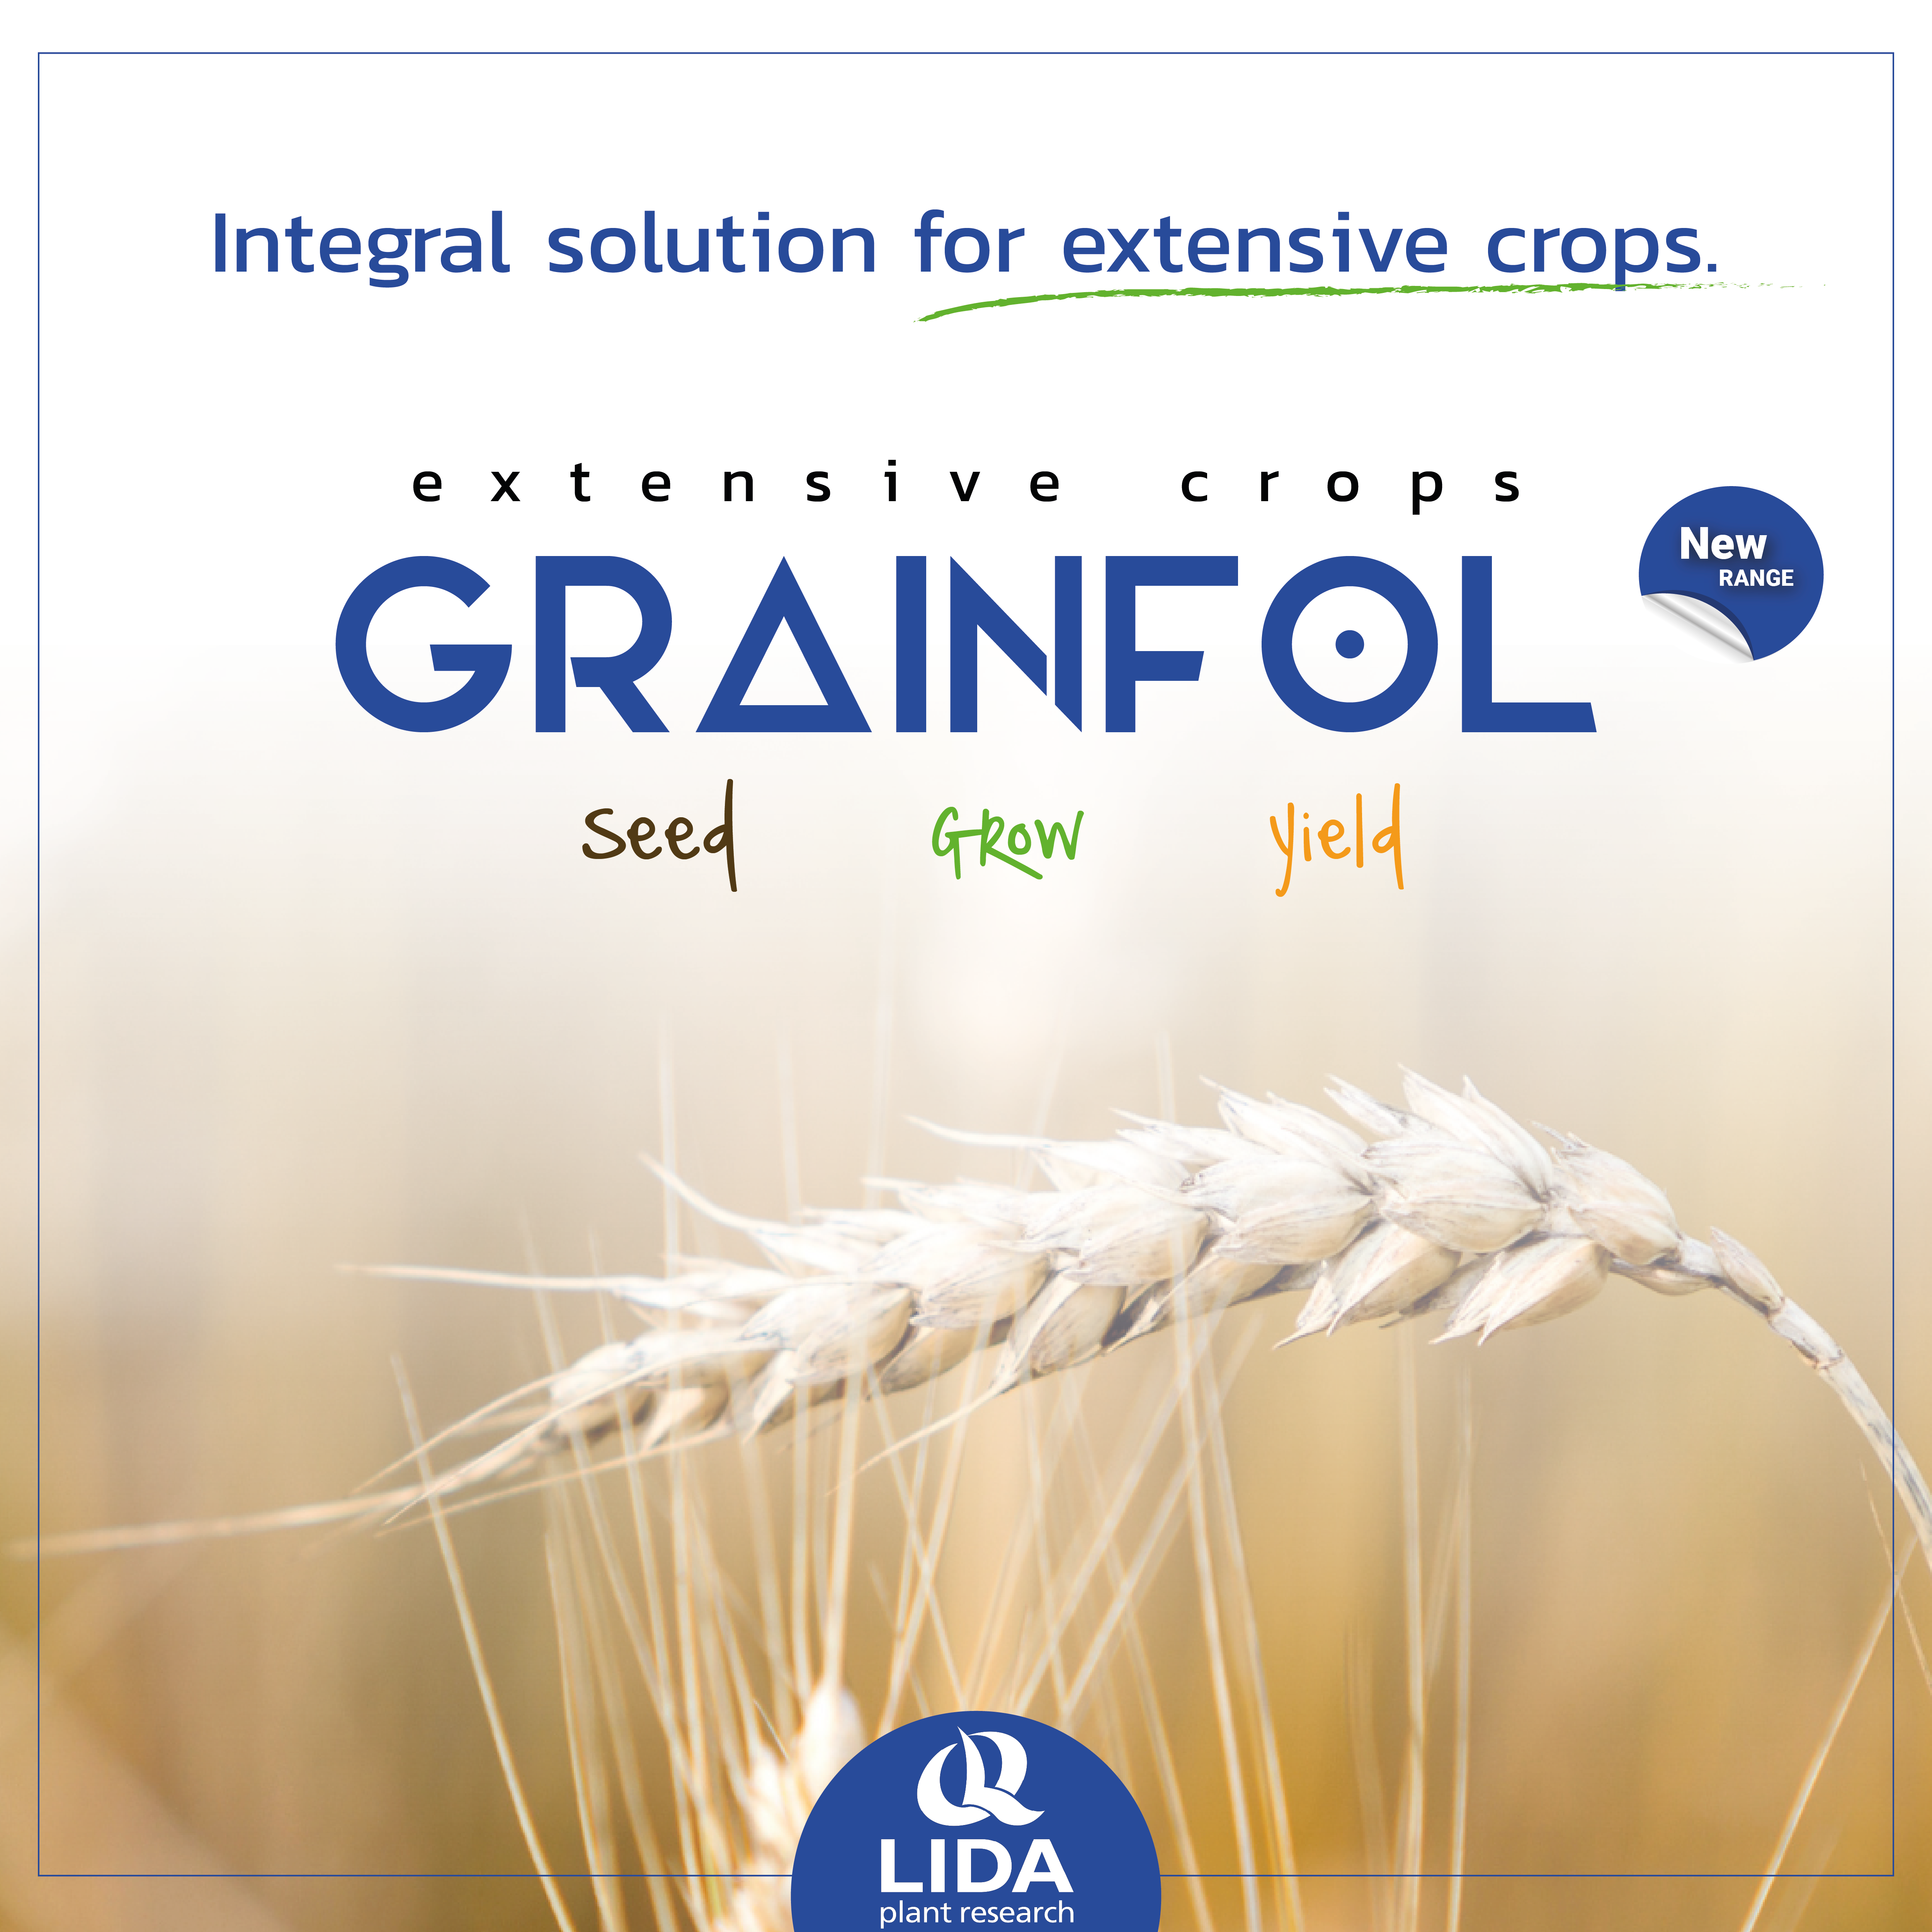 LIDA Plant Research launches GRAINFOL, a new range of biostimulants for extensive crops.